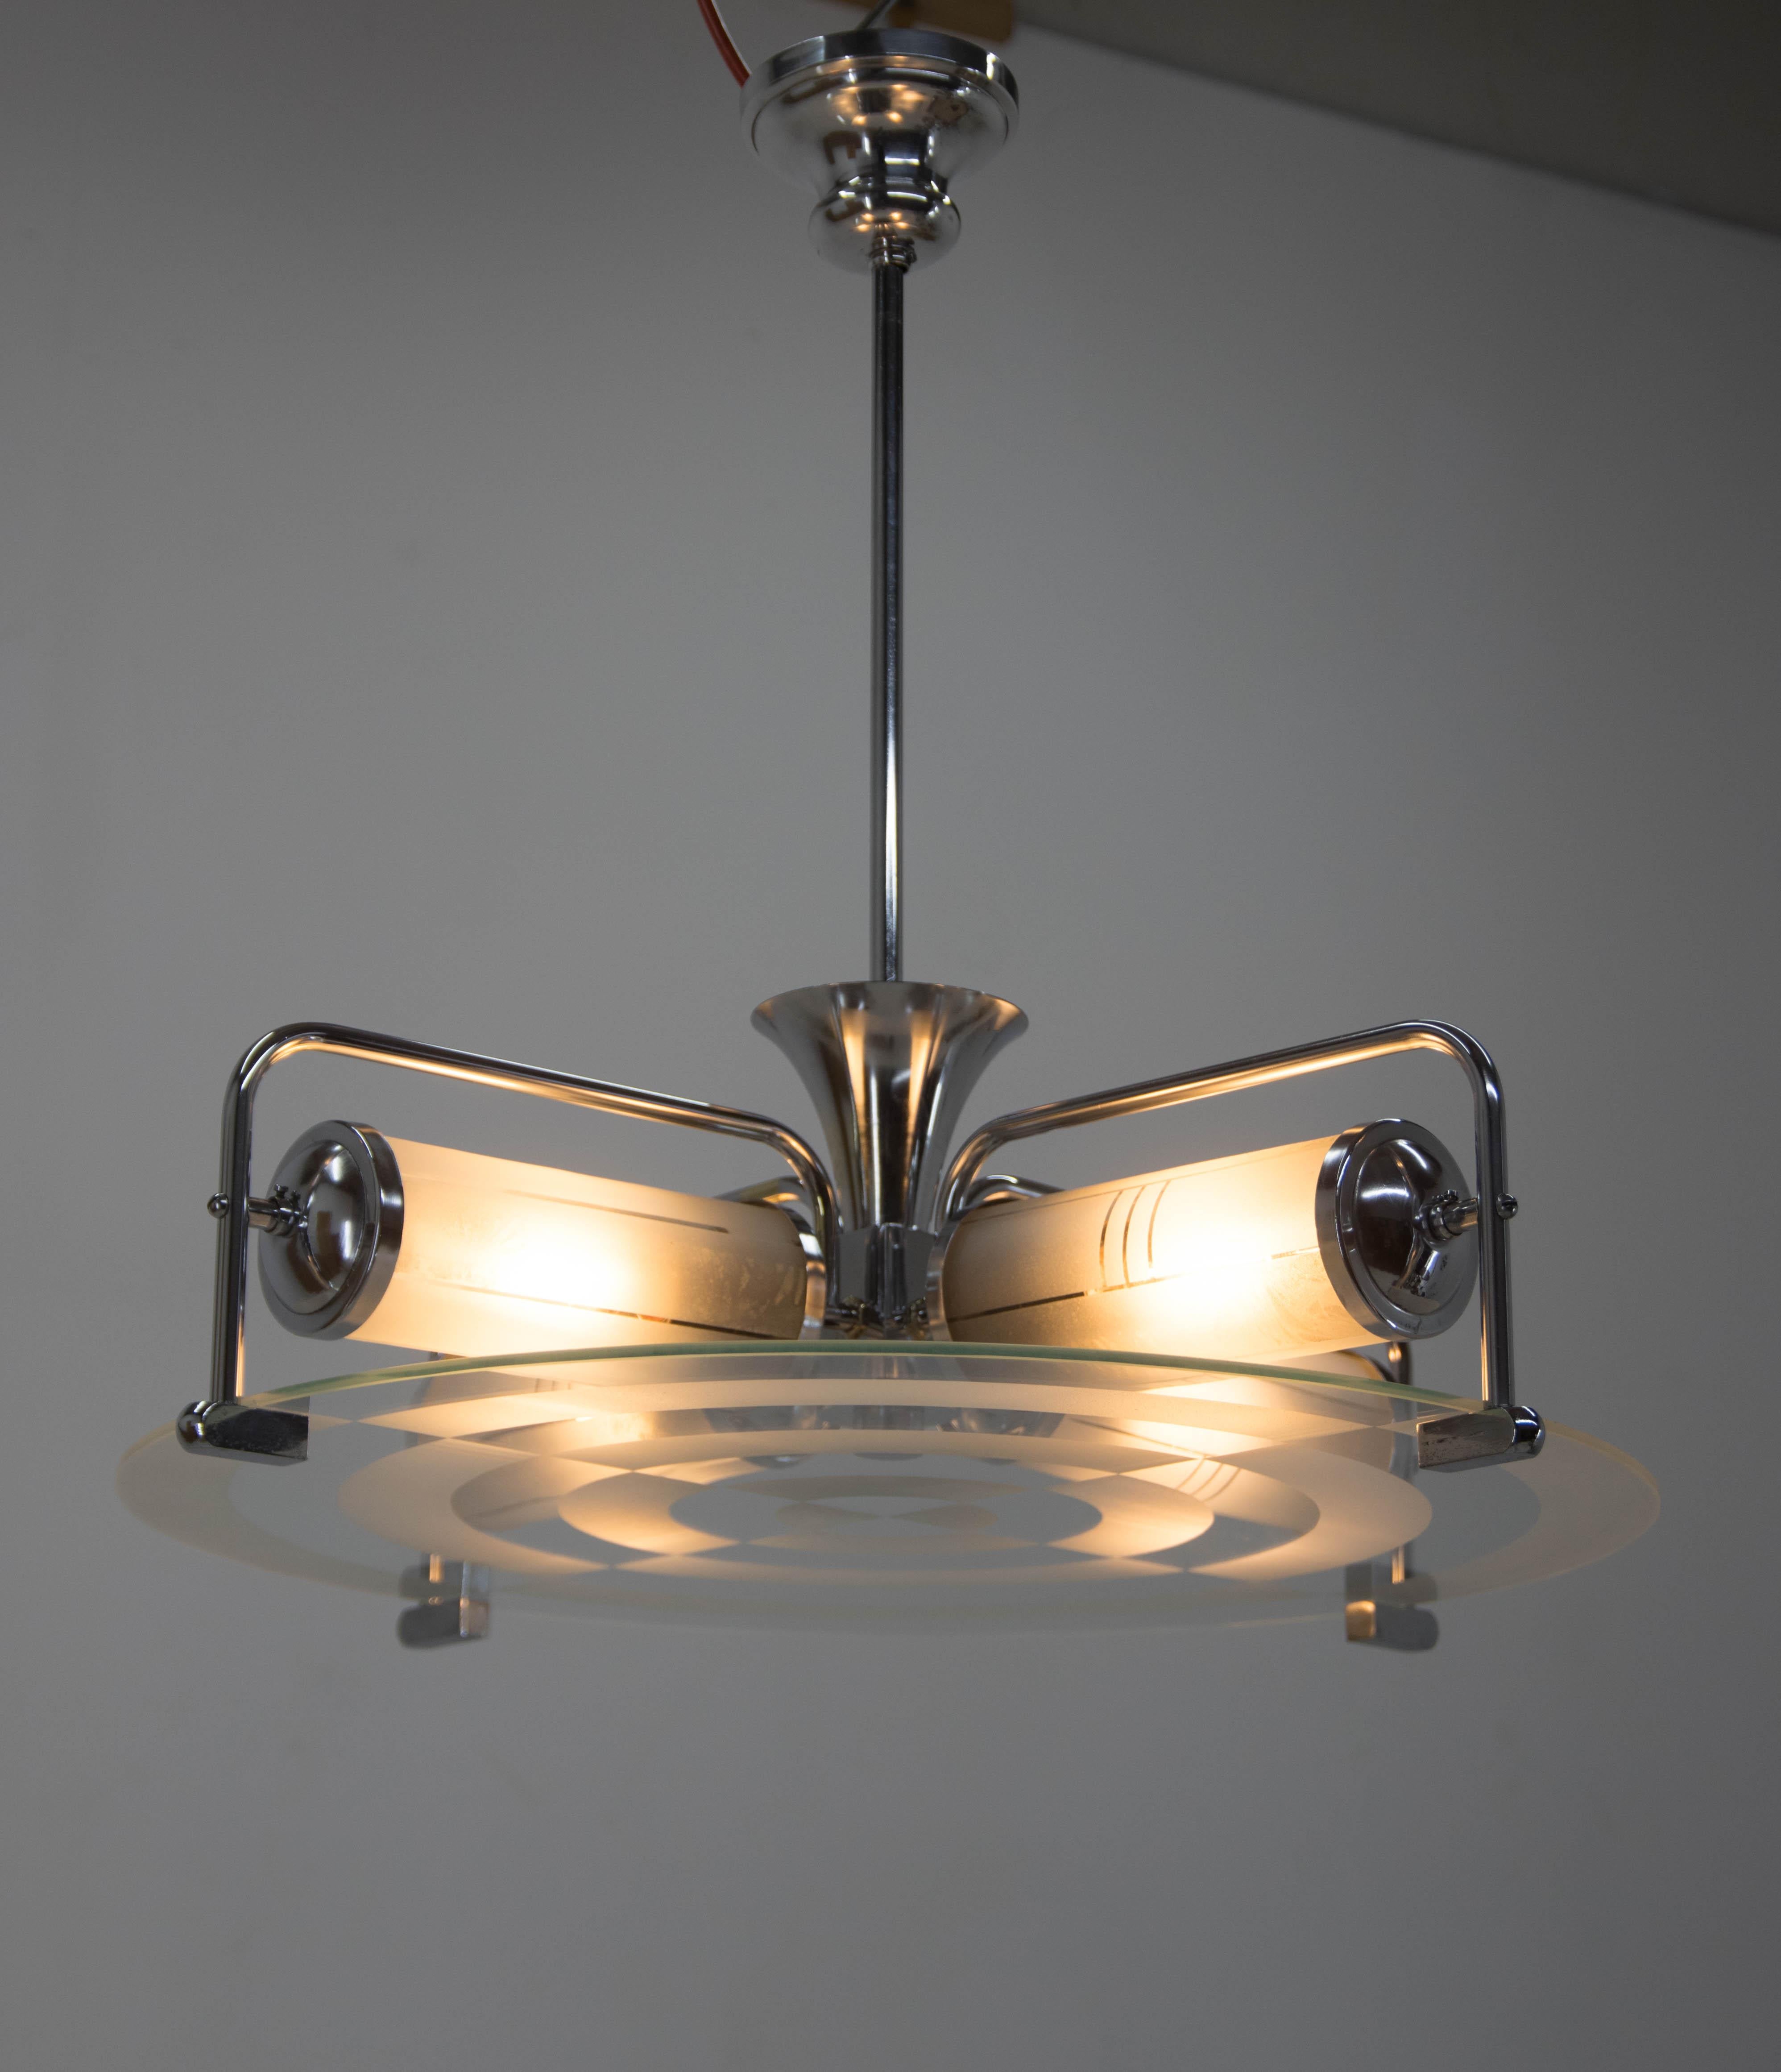 Rare Art Deco / Functionalist Tubular Chandelier, 1930s In Good Condition For Sale In Praha, CZ